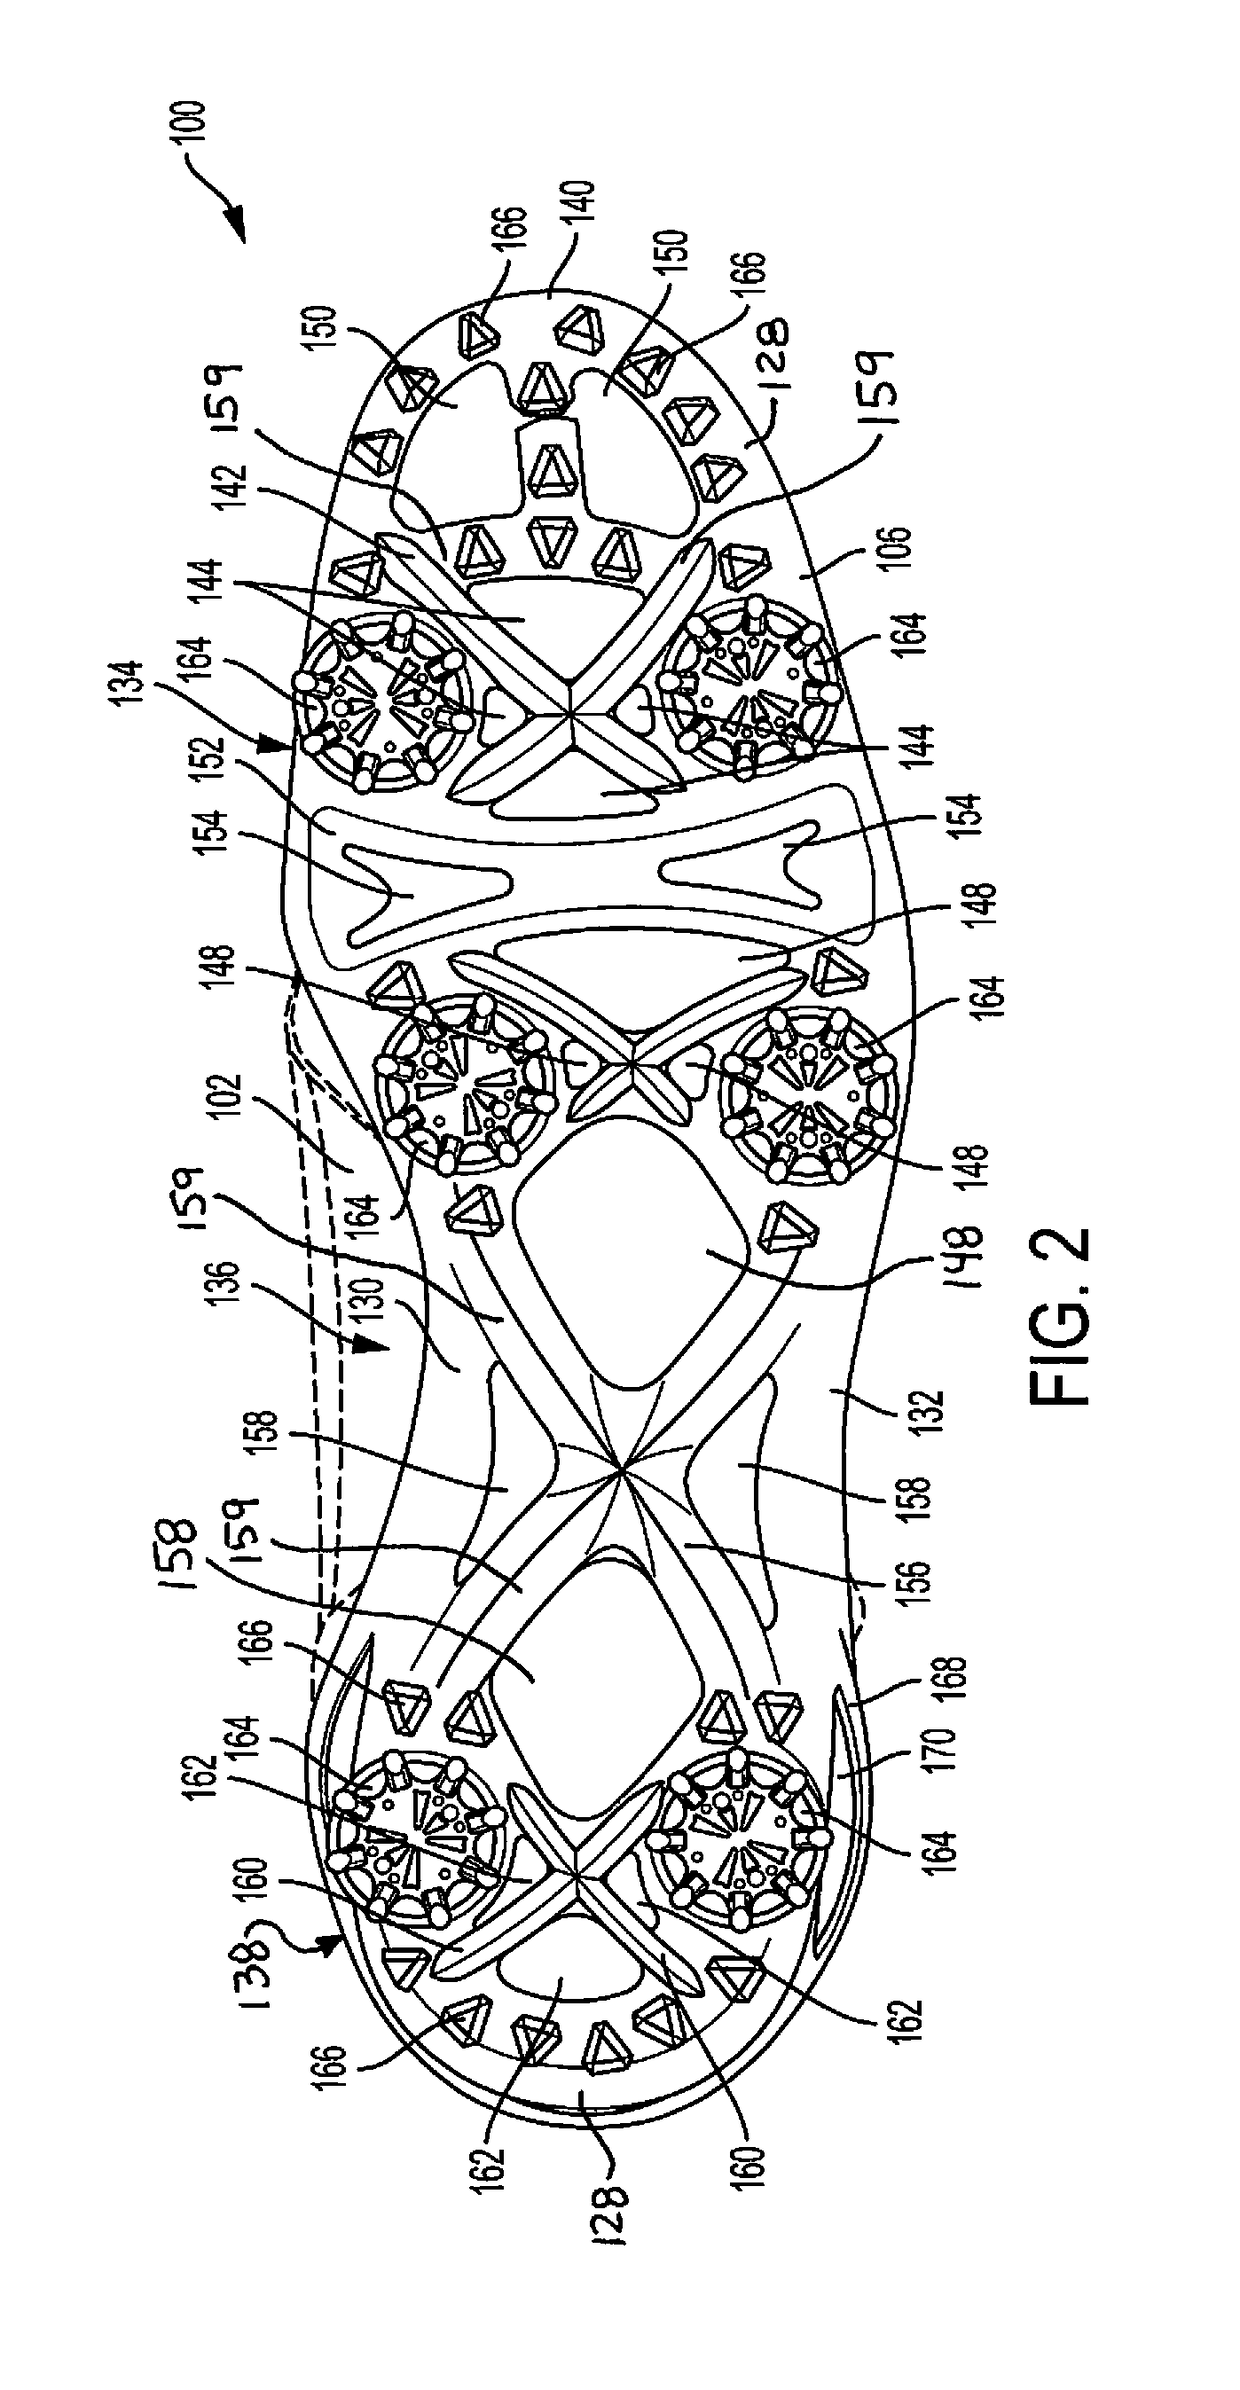 Golf shoe with an outsole having a skeletal frame